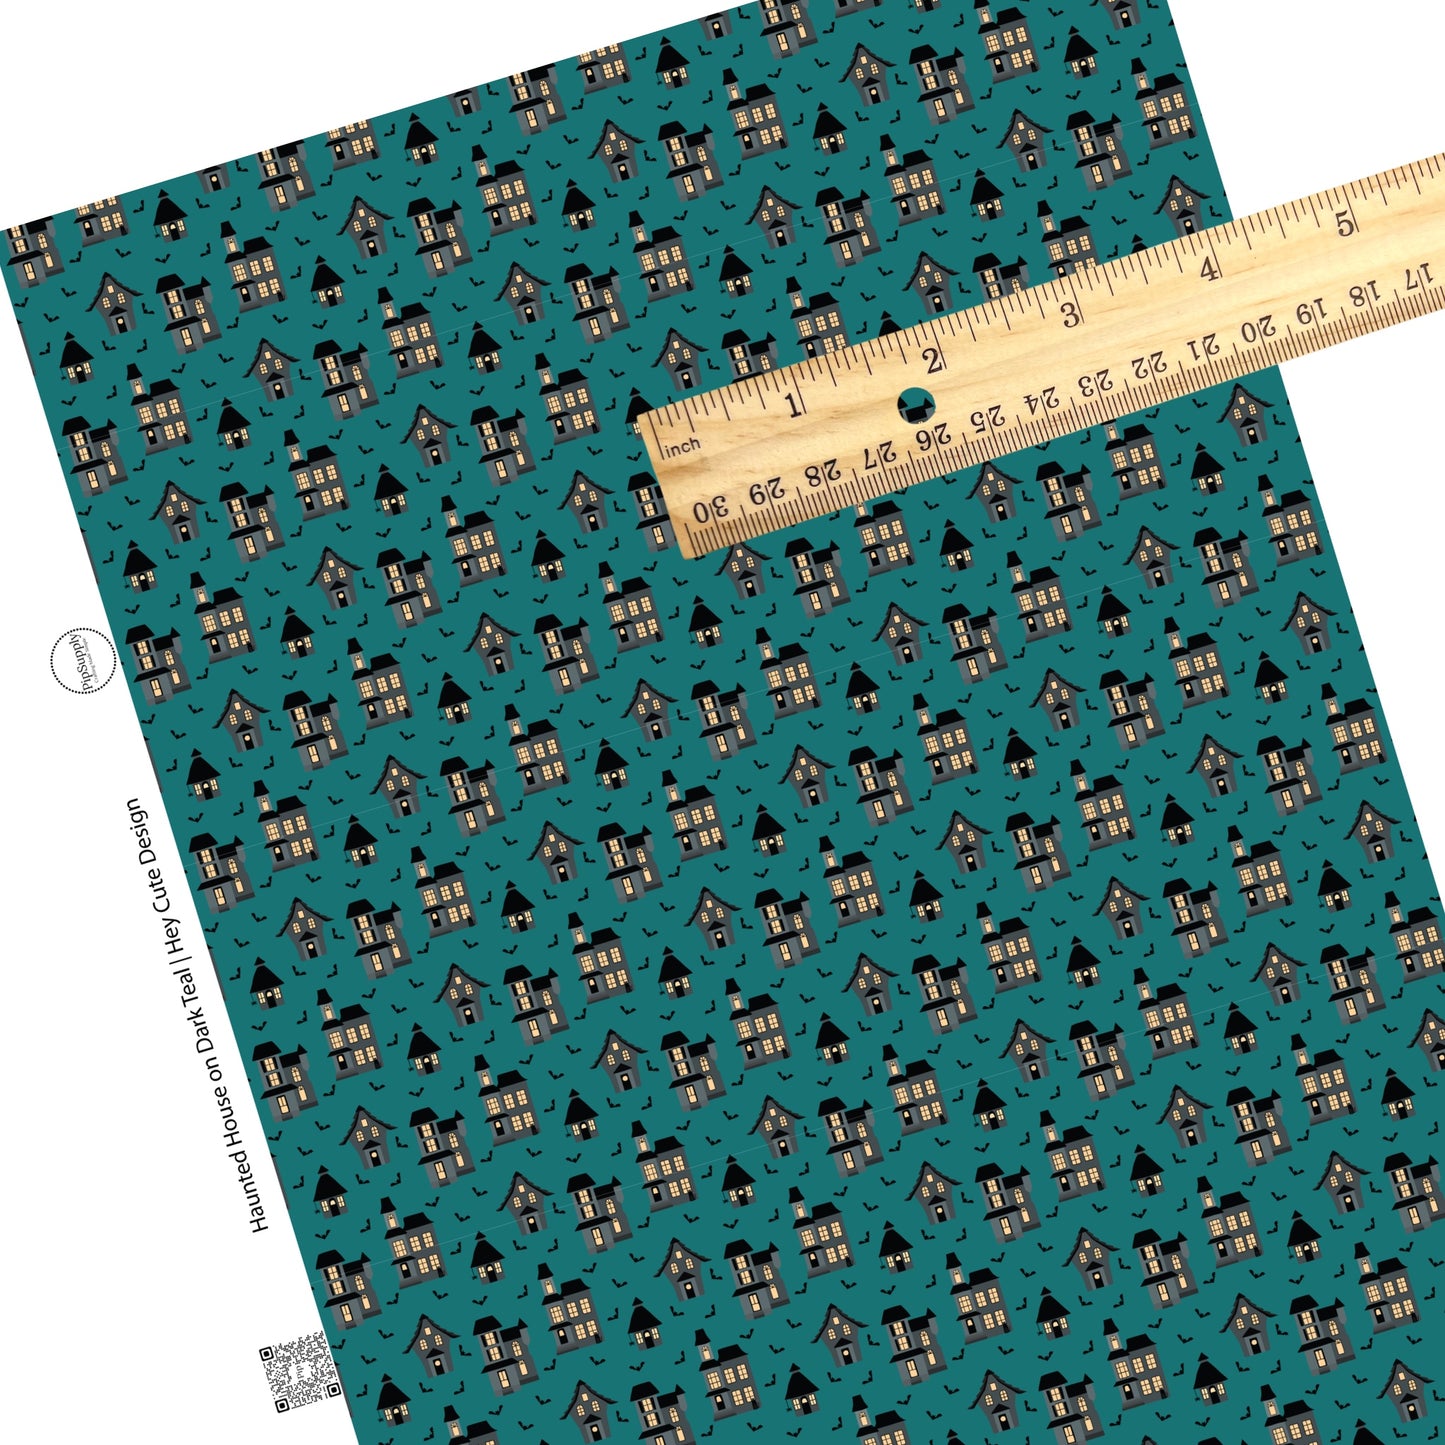 Spooky halloween houses and bats on teal faux leather sheets